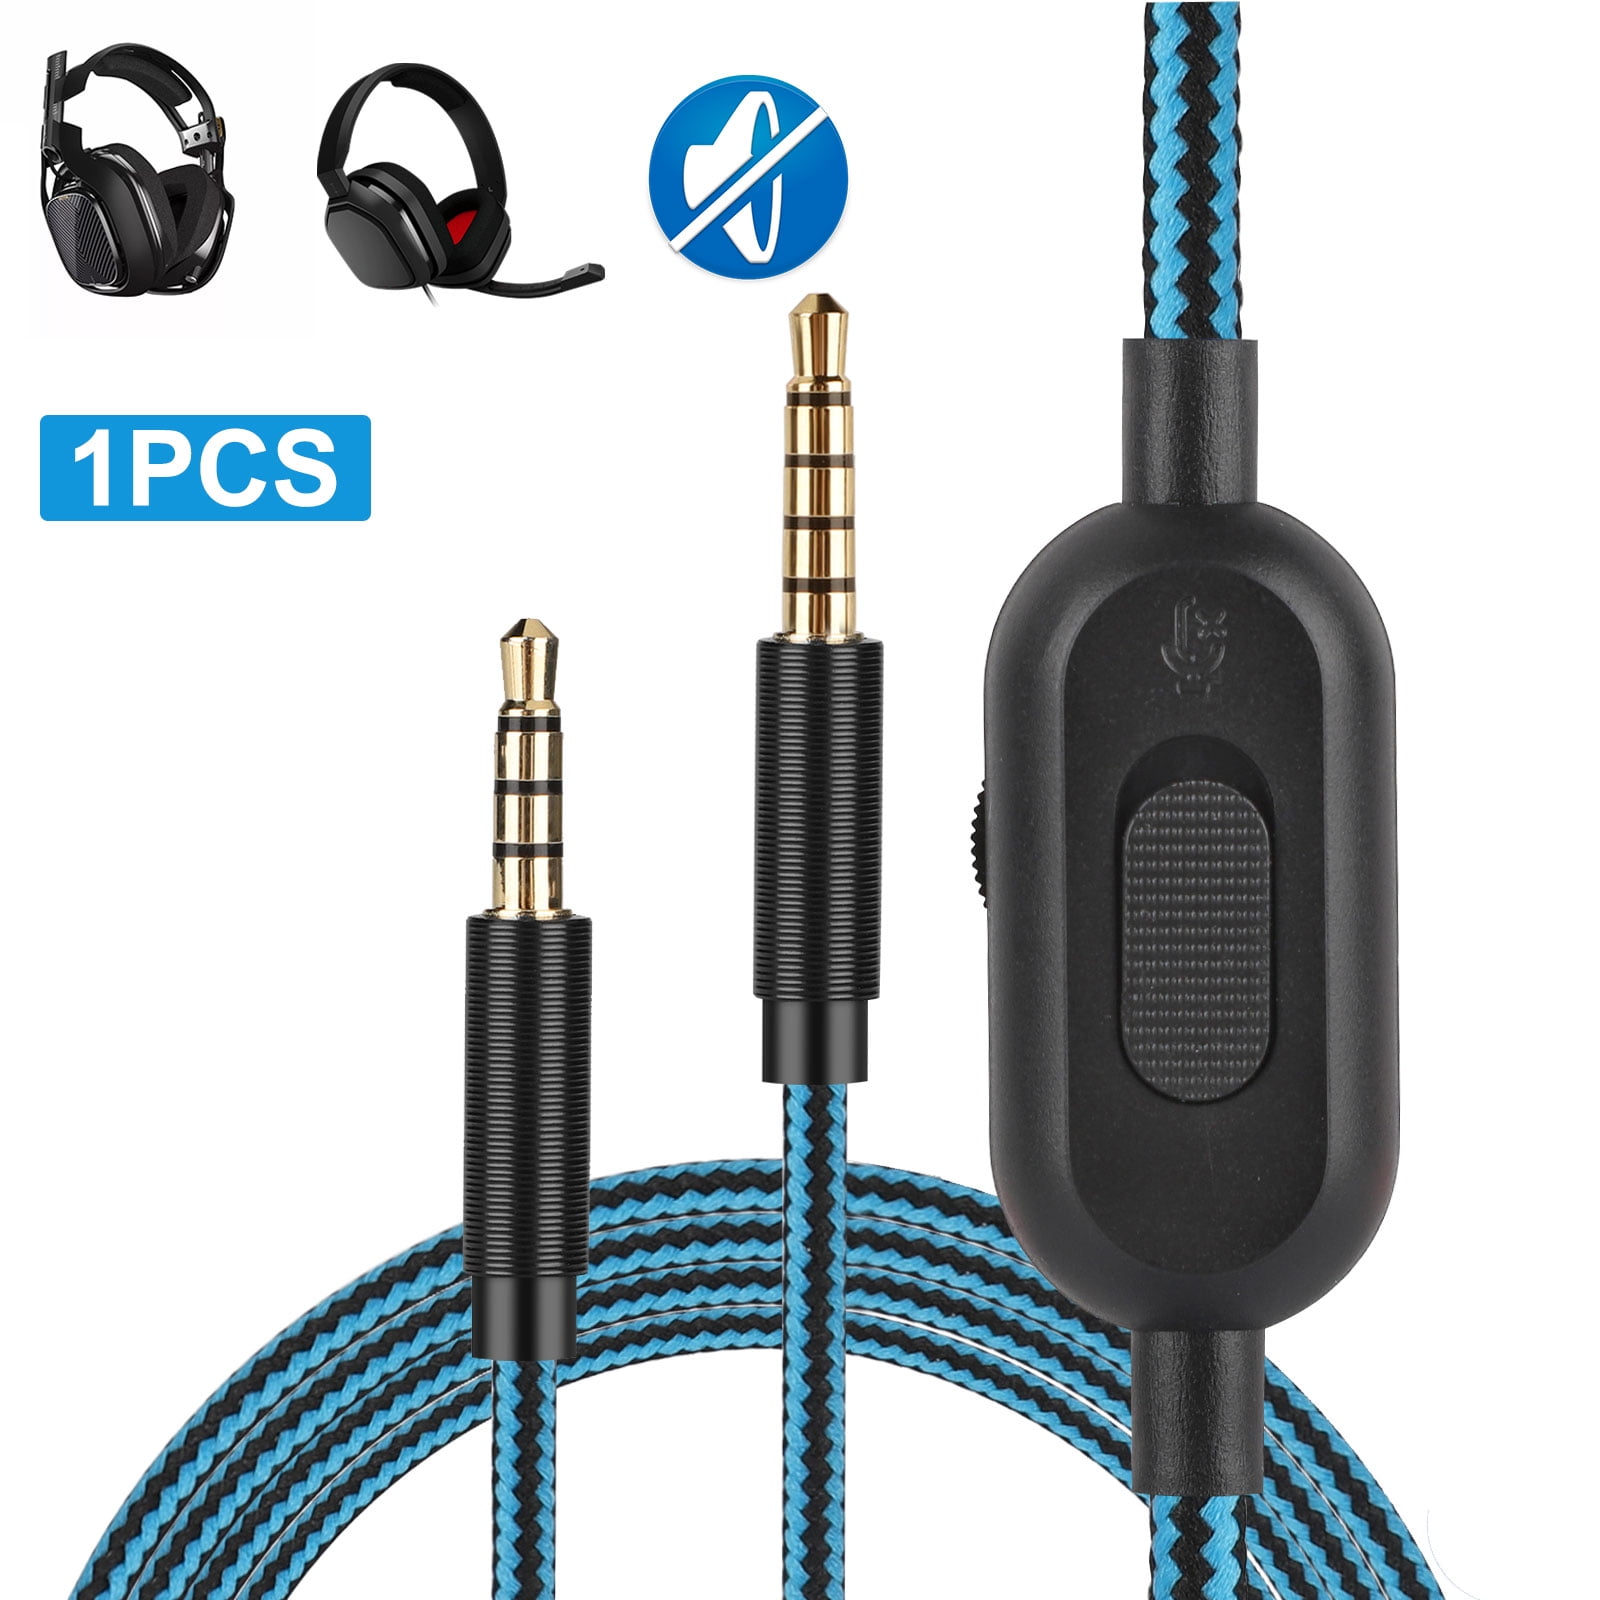 Astro a40 replacement audio cable - lalapams